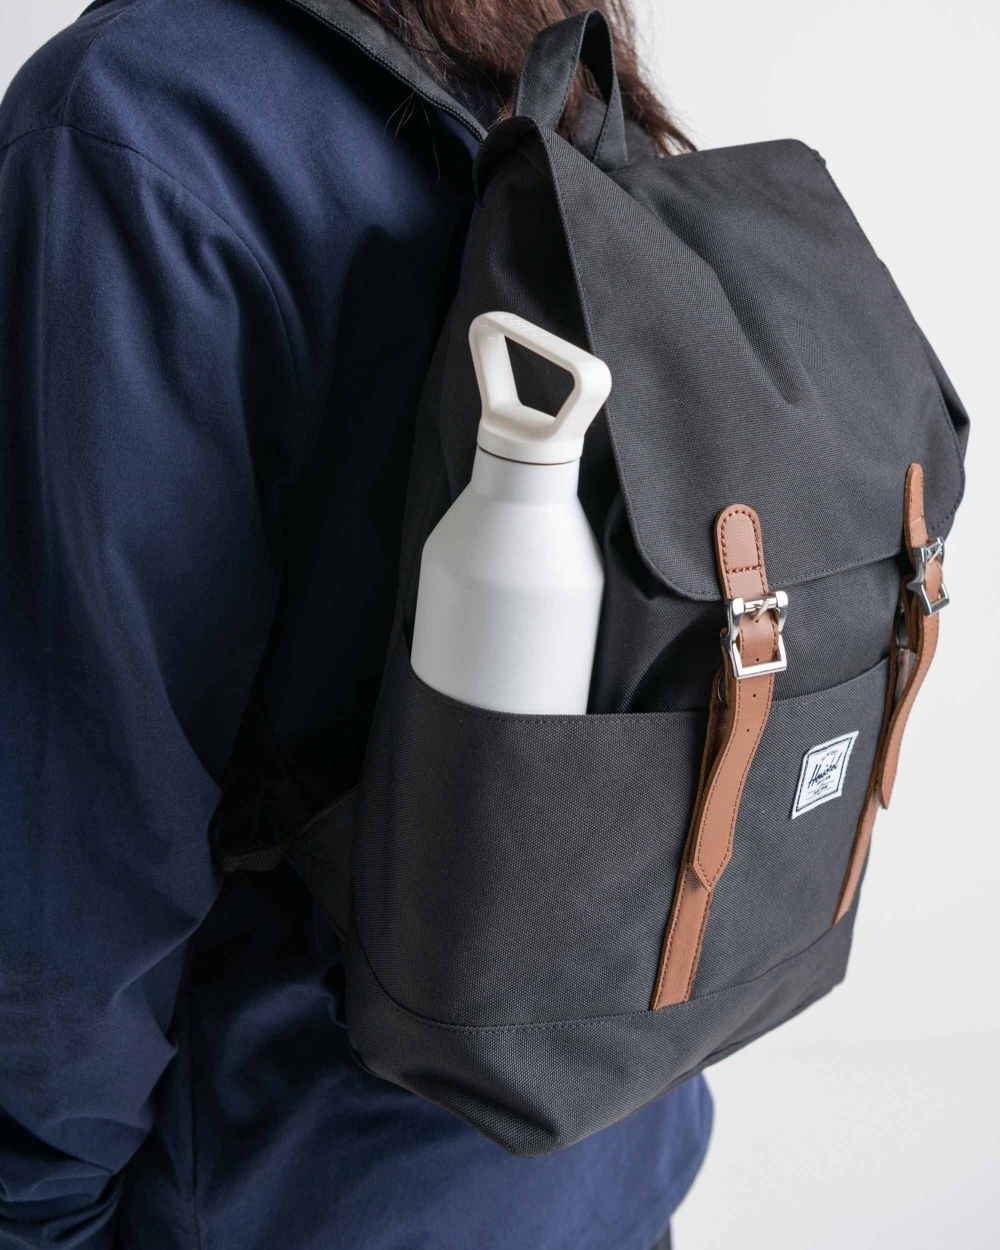 The black backpack with water bottle pocket and brown straps